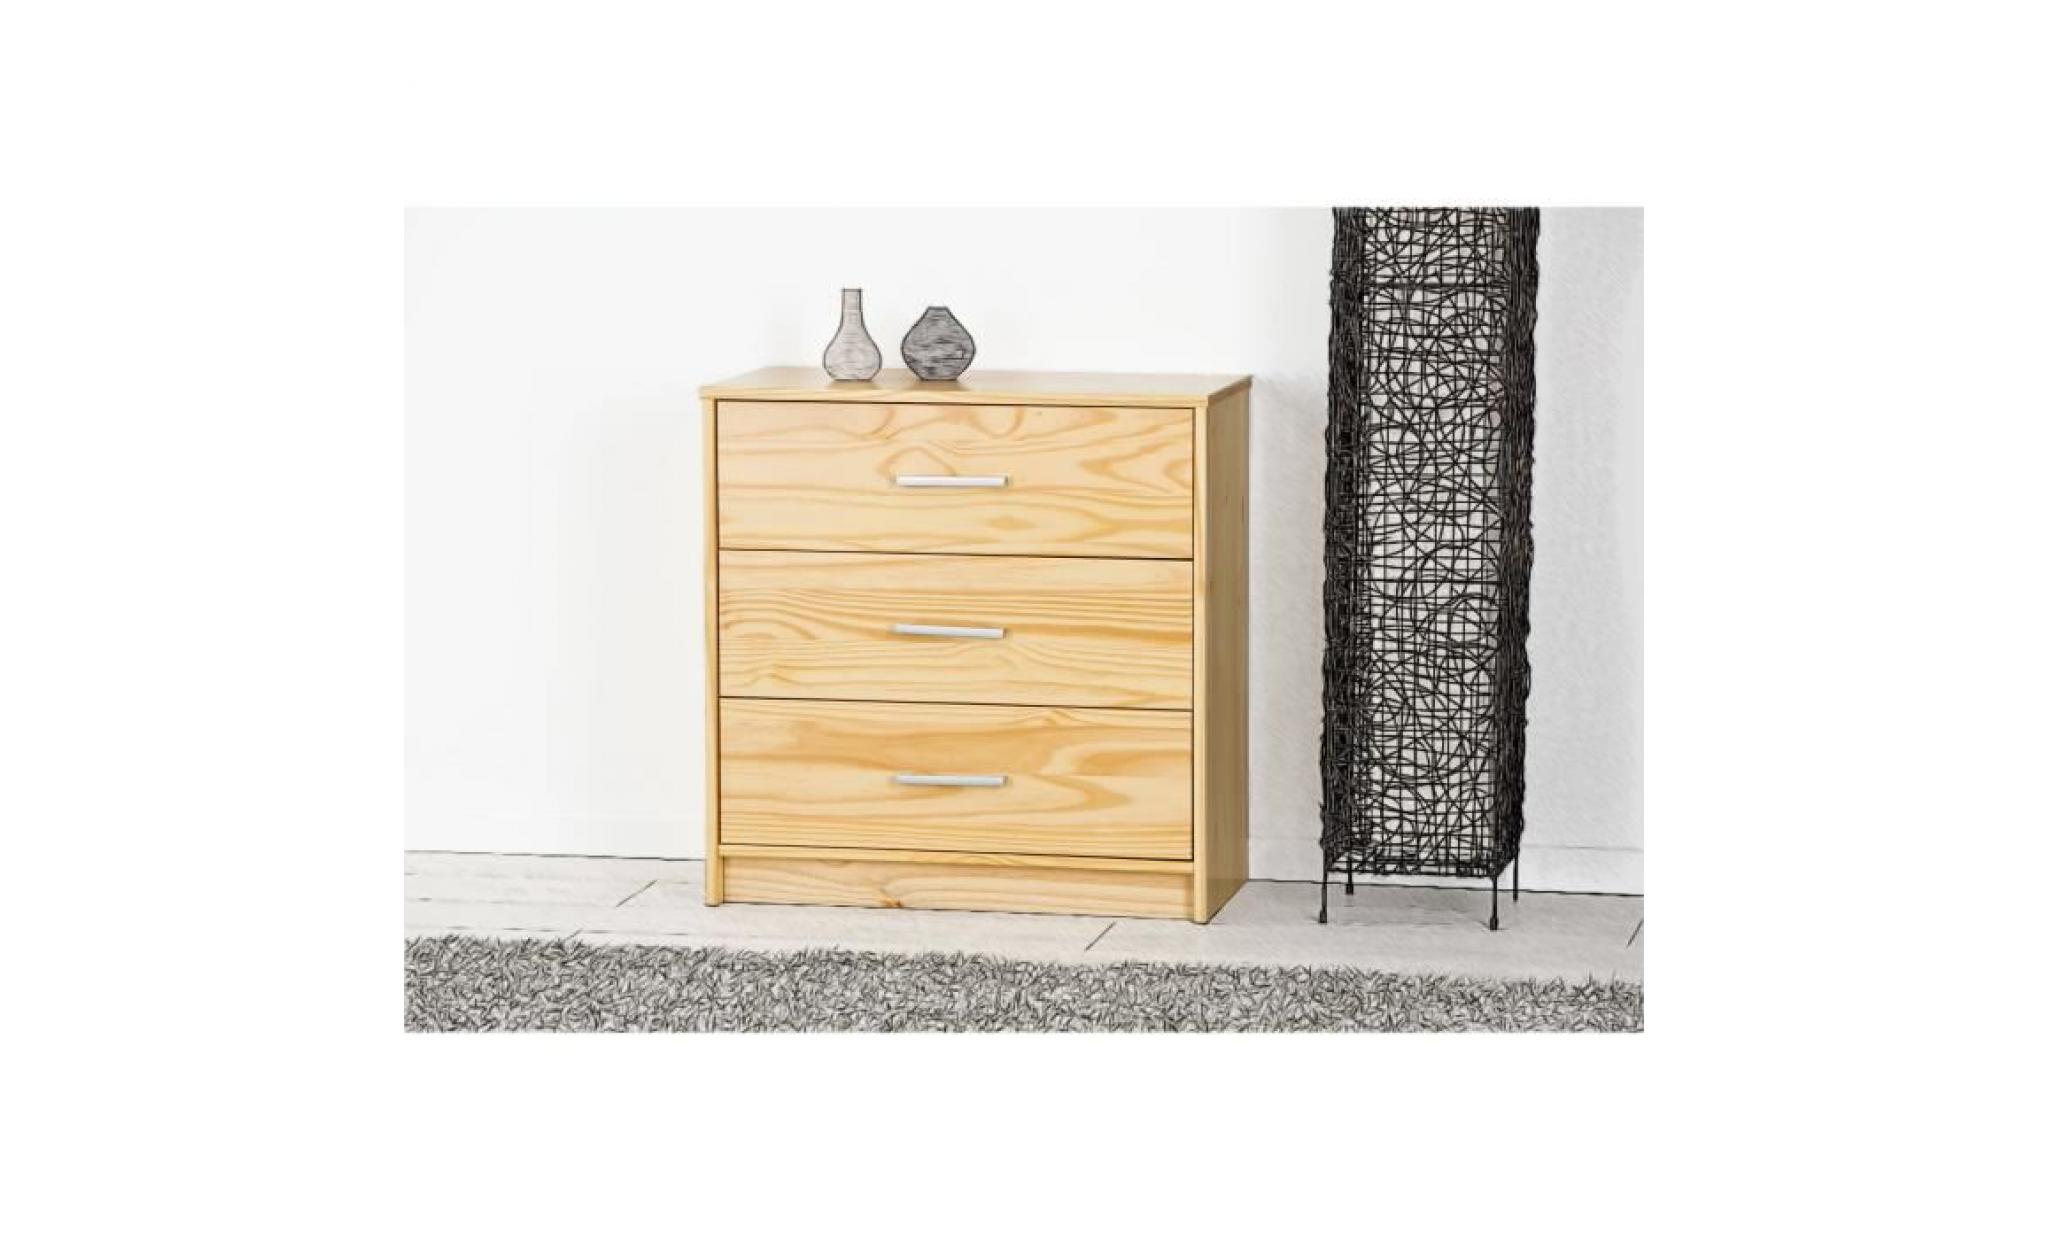 commode moderne 3 tiroirs, commode en pin massif naturel, commode chambre, commode rangement, commode chambre adulte, commode large pas cher